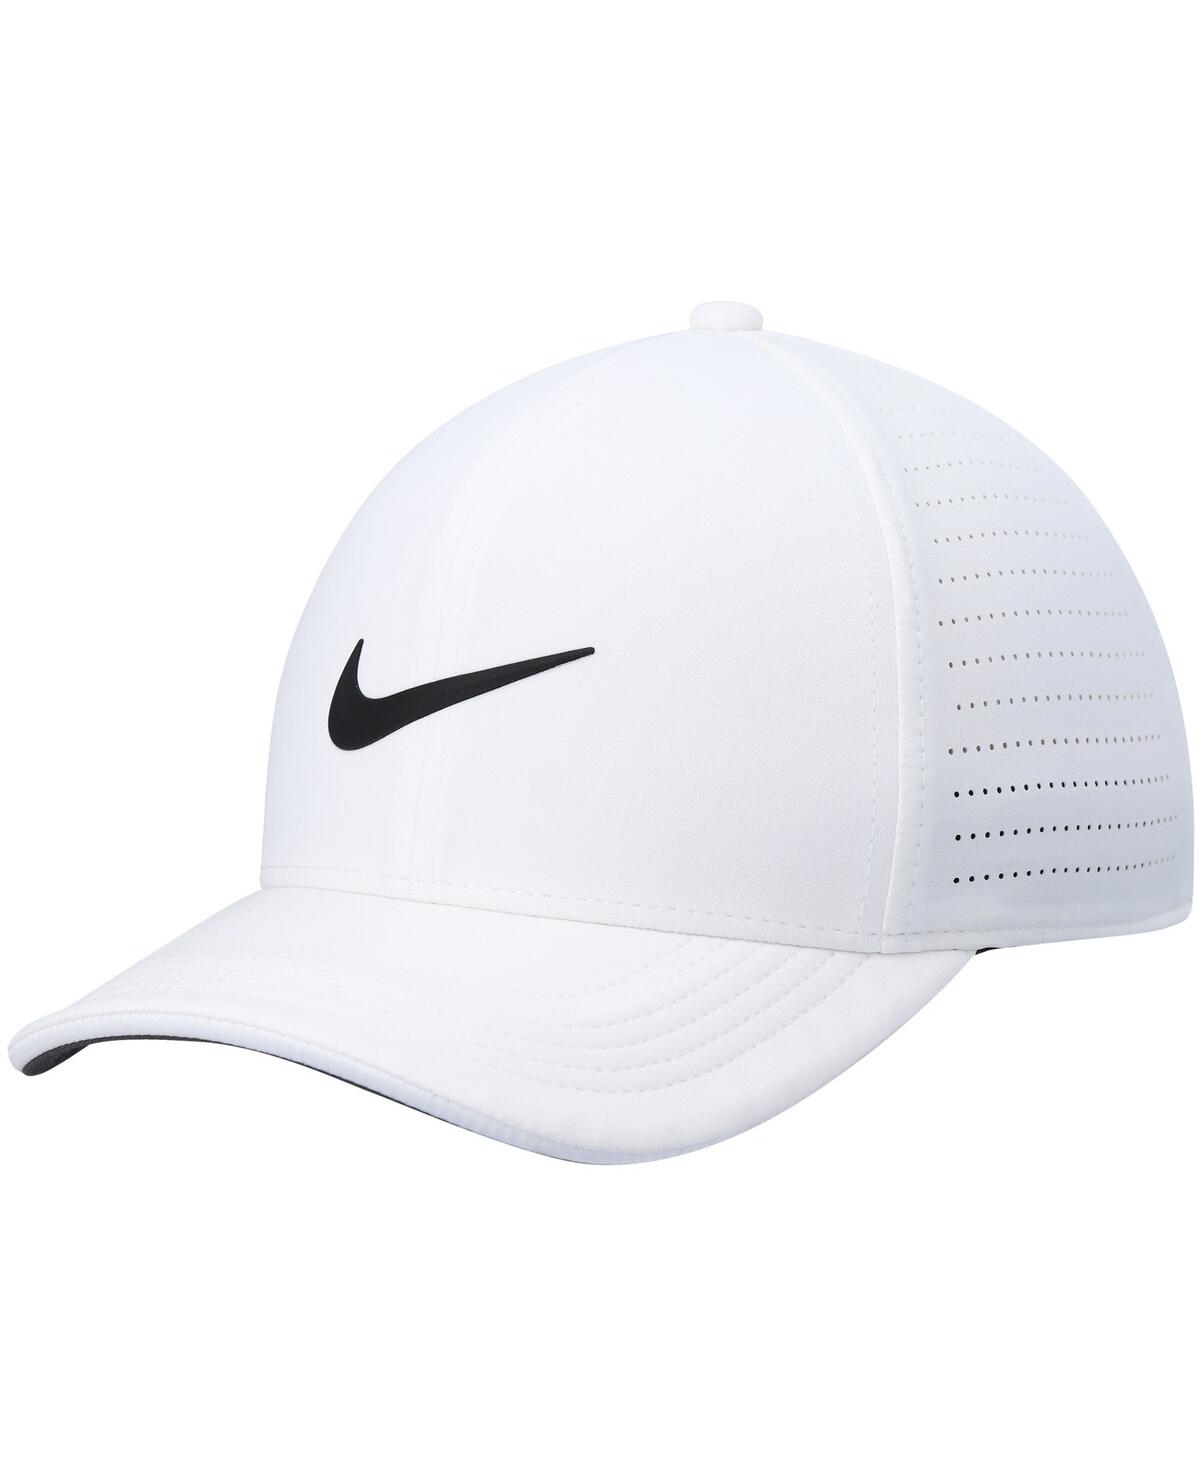 Nike Men's  Golf Gray Aerobill Classic99 Performance Fitted Hat